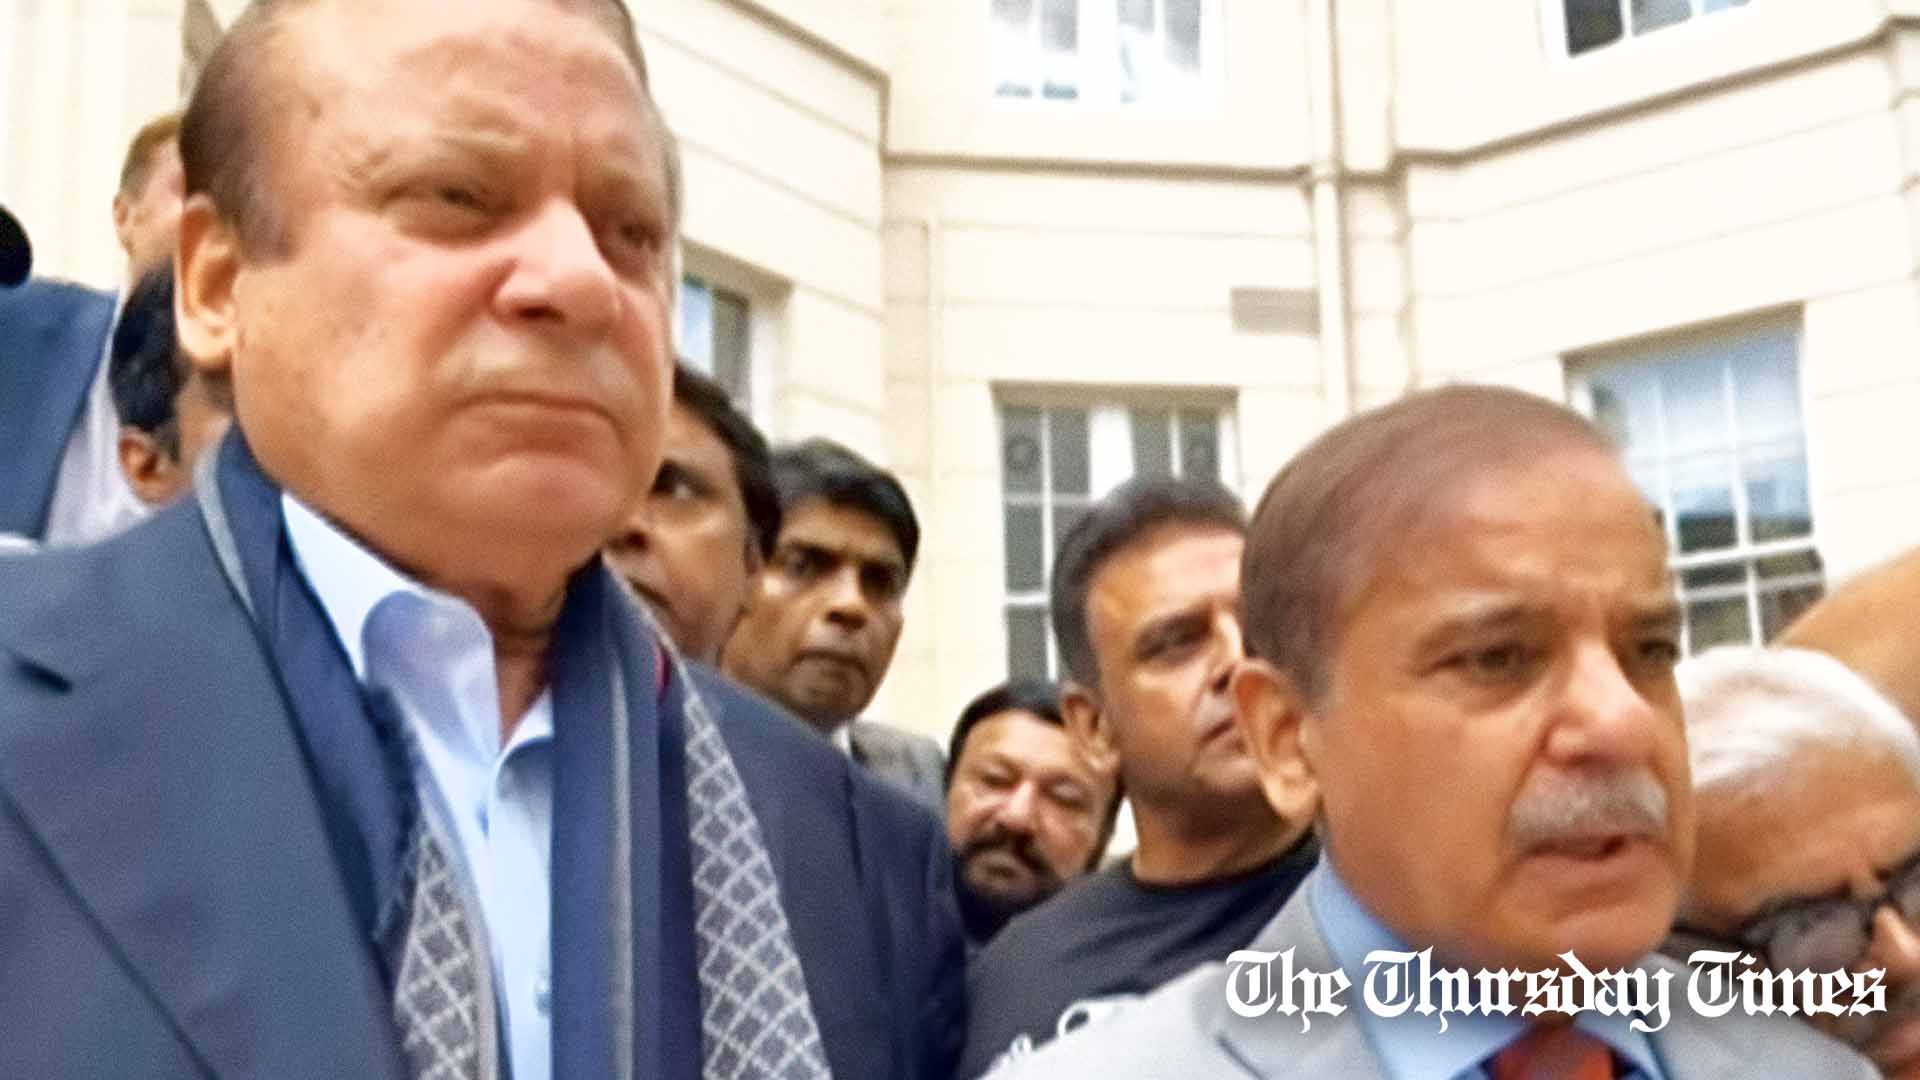 A file photo is shown of PML(N) chief Nawaz Sharif (L) and PML(N) president Shehbaz Sharif (R) outside Stanhope Place in Westminster. — FILE/THE THURSDAY TIMES